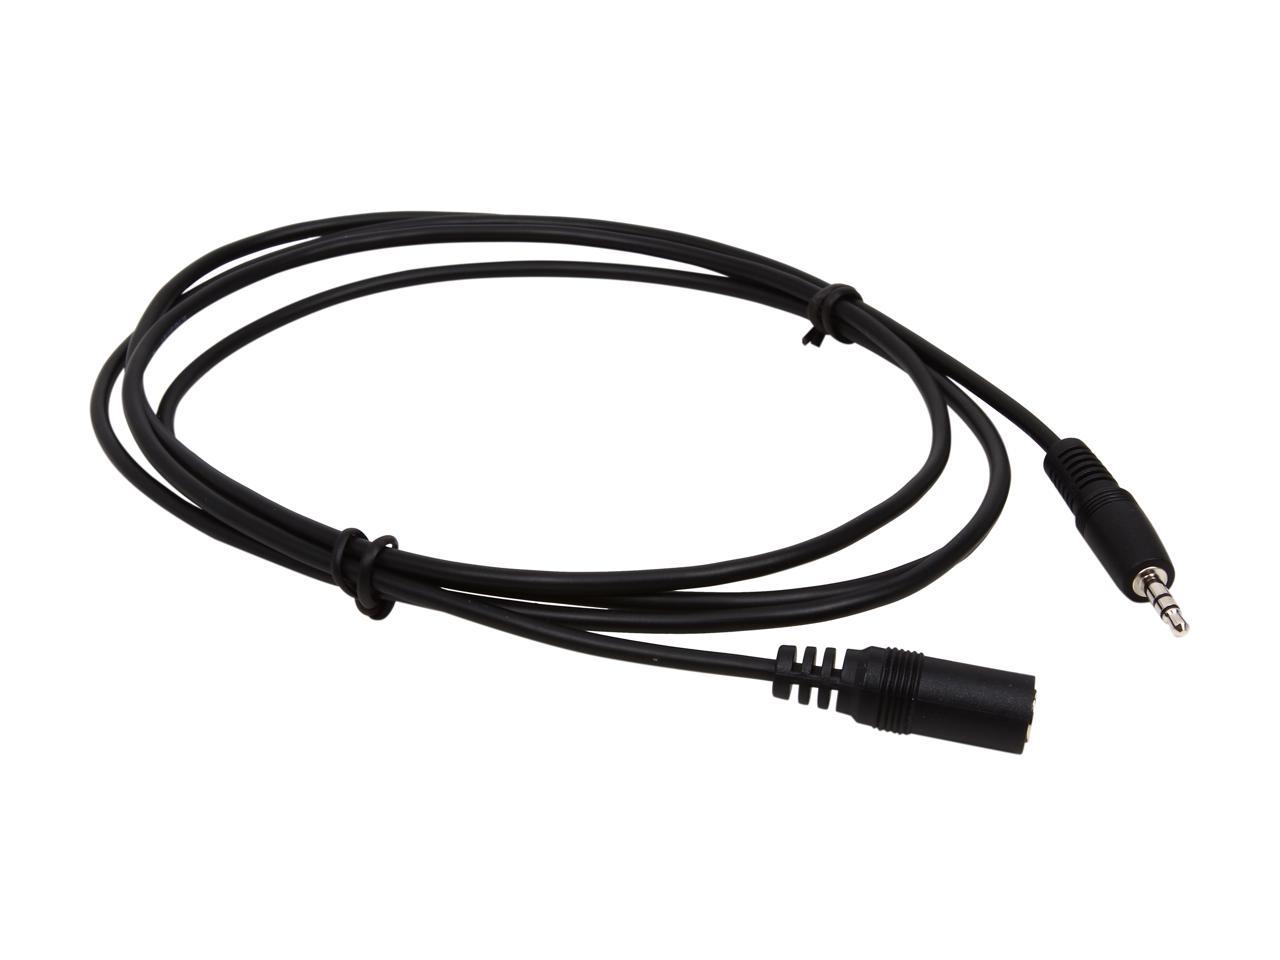 C2G 13787 3.5mm M/F Shielded Stereo Audio Extension Cable, Black (6 Feet, 1.82 Meters) - image 2 of 3